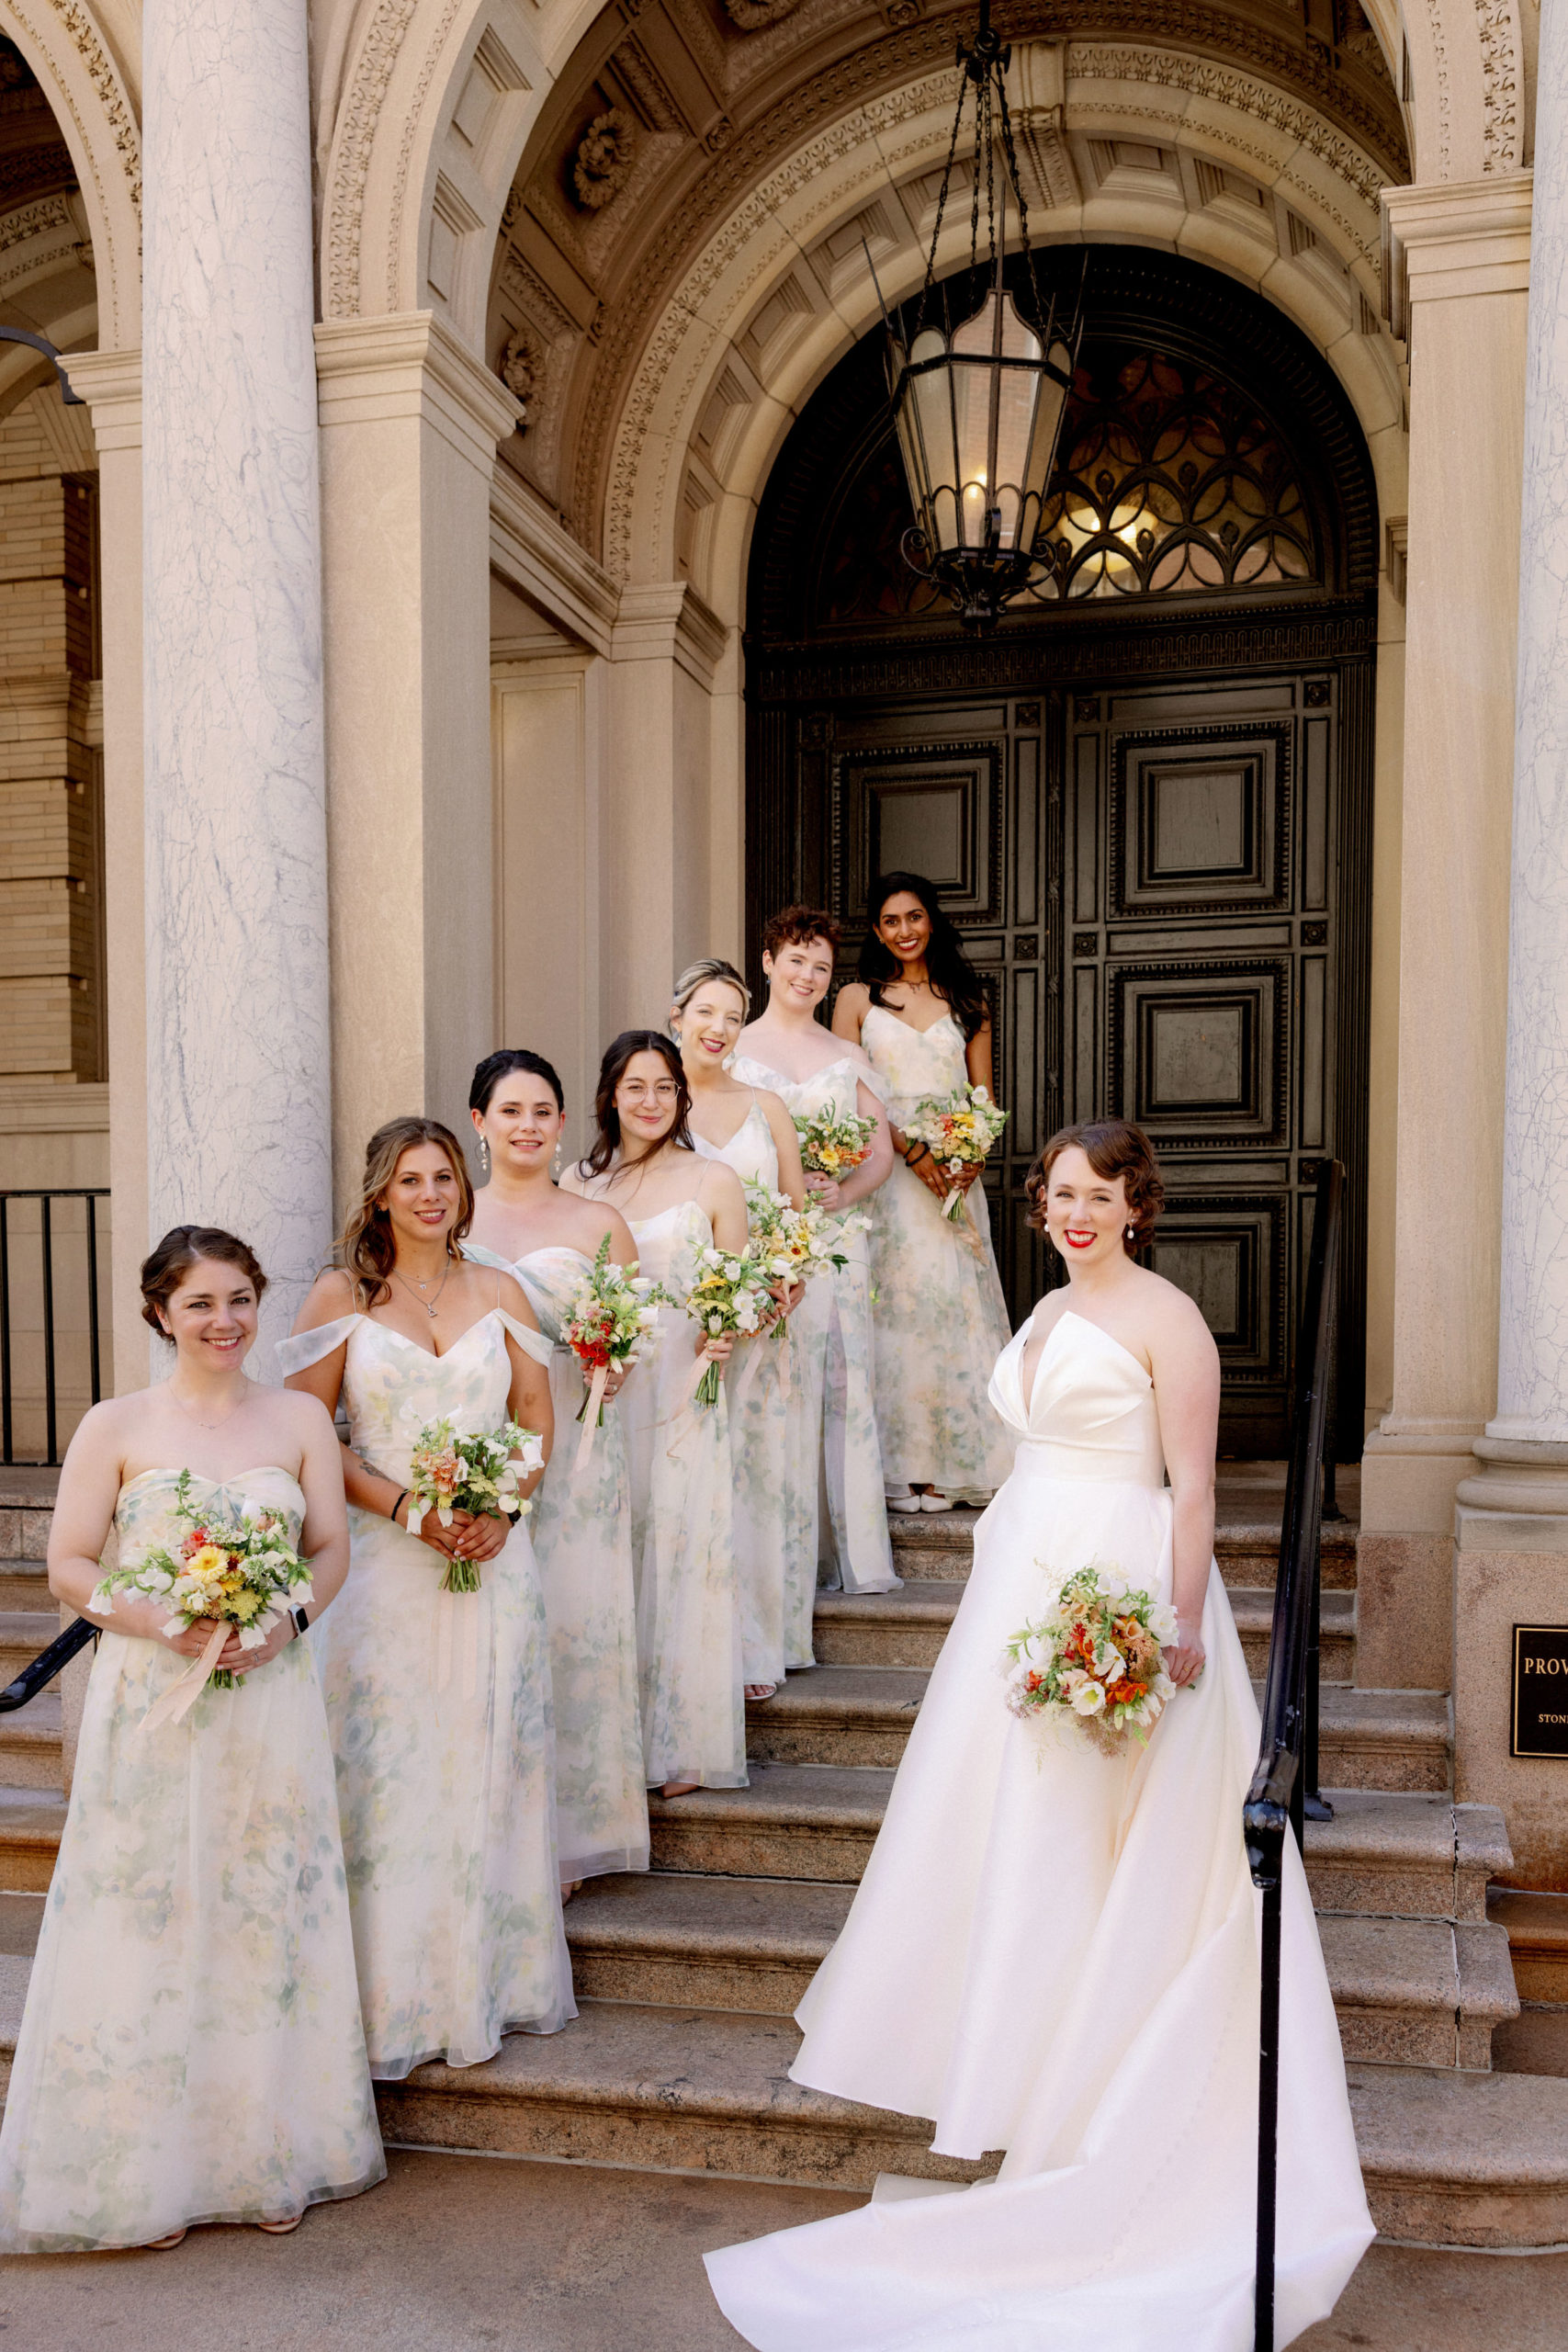 The bride and her bridesmaids are wearing their pretty 2022 bridesmaid dress. Image by Jenny Fu Studio